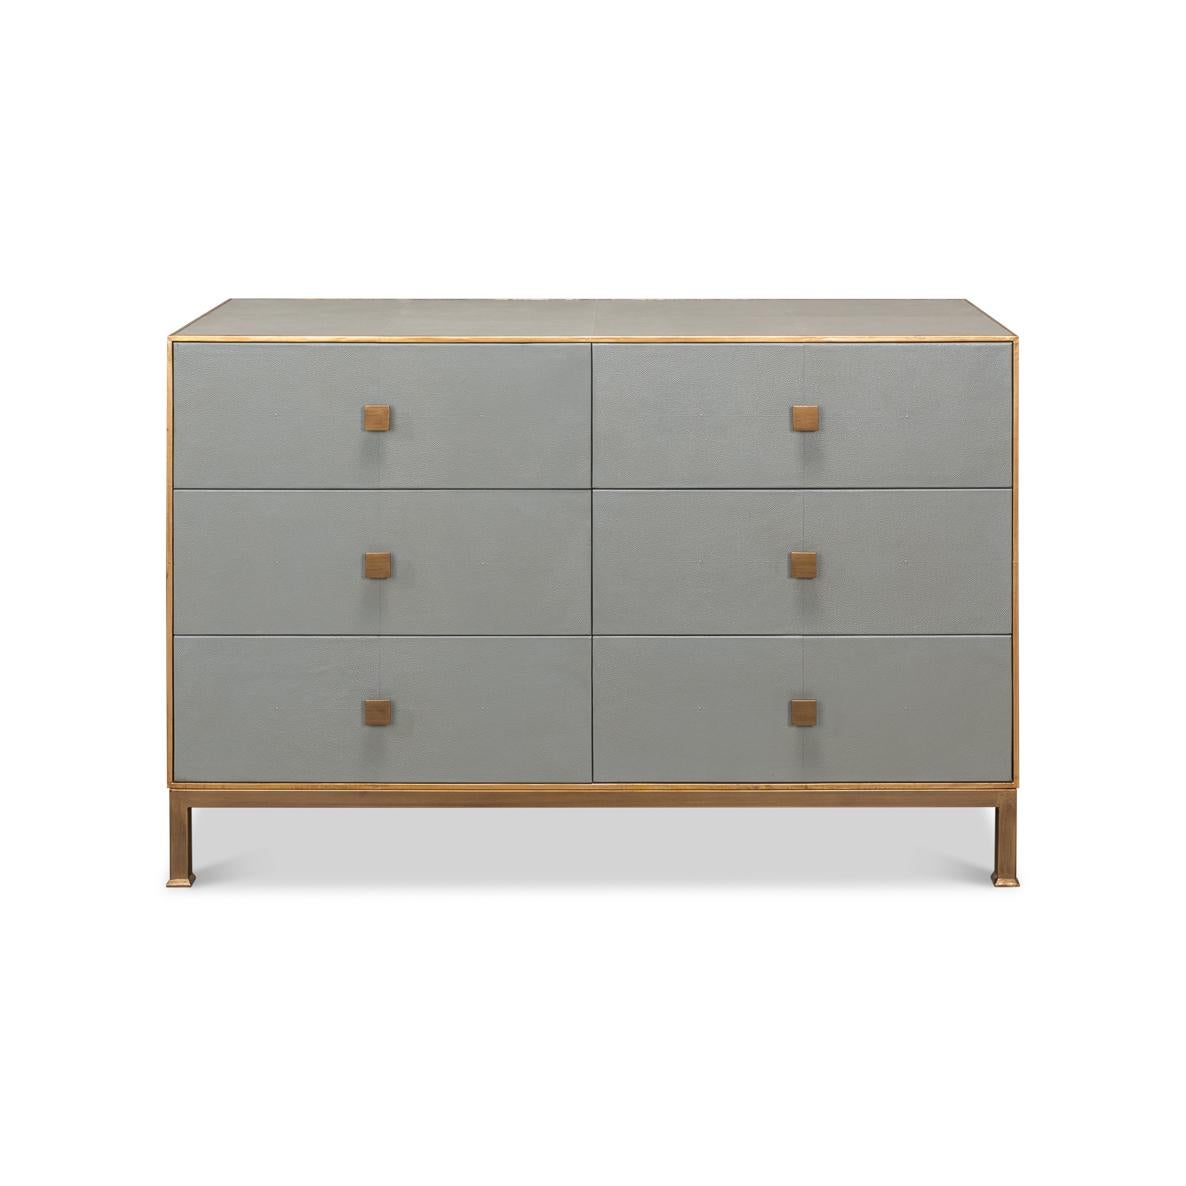 This chic piece showcases an embossed gray leather facade accented by elegant gold trim and hardware. With six spacious drawers that provide ample storage. Its minimalist design is punctuated by square brass handles that add a touch of glamour,